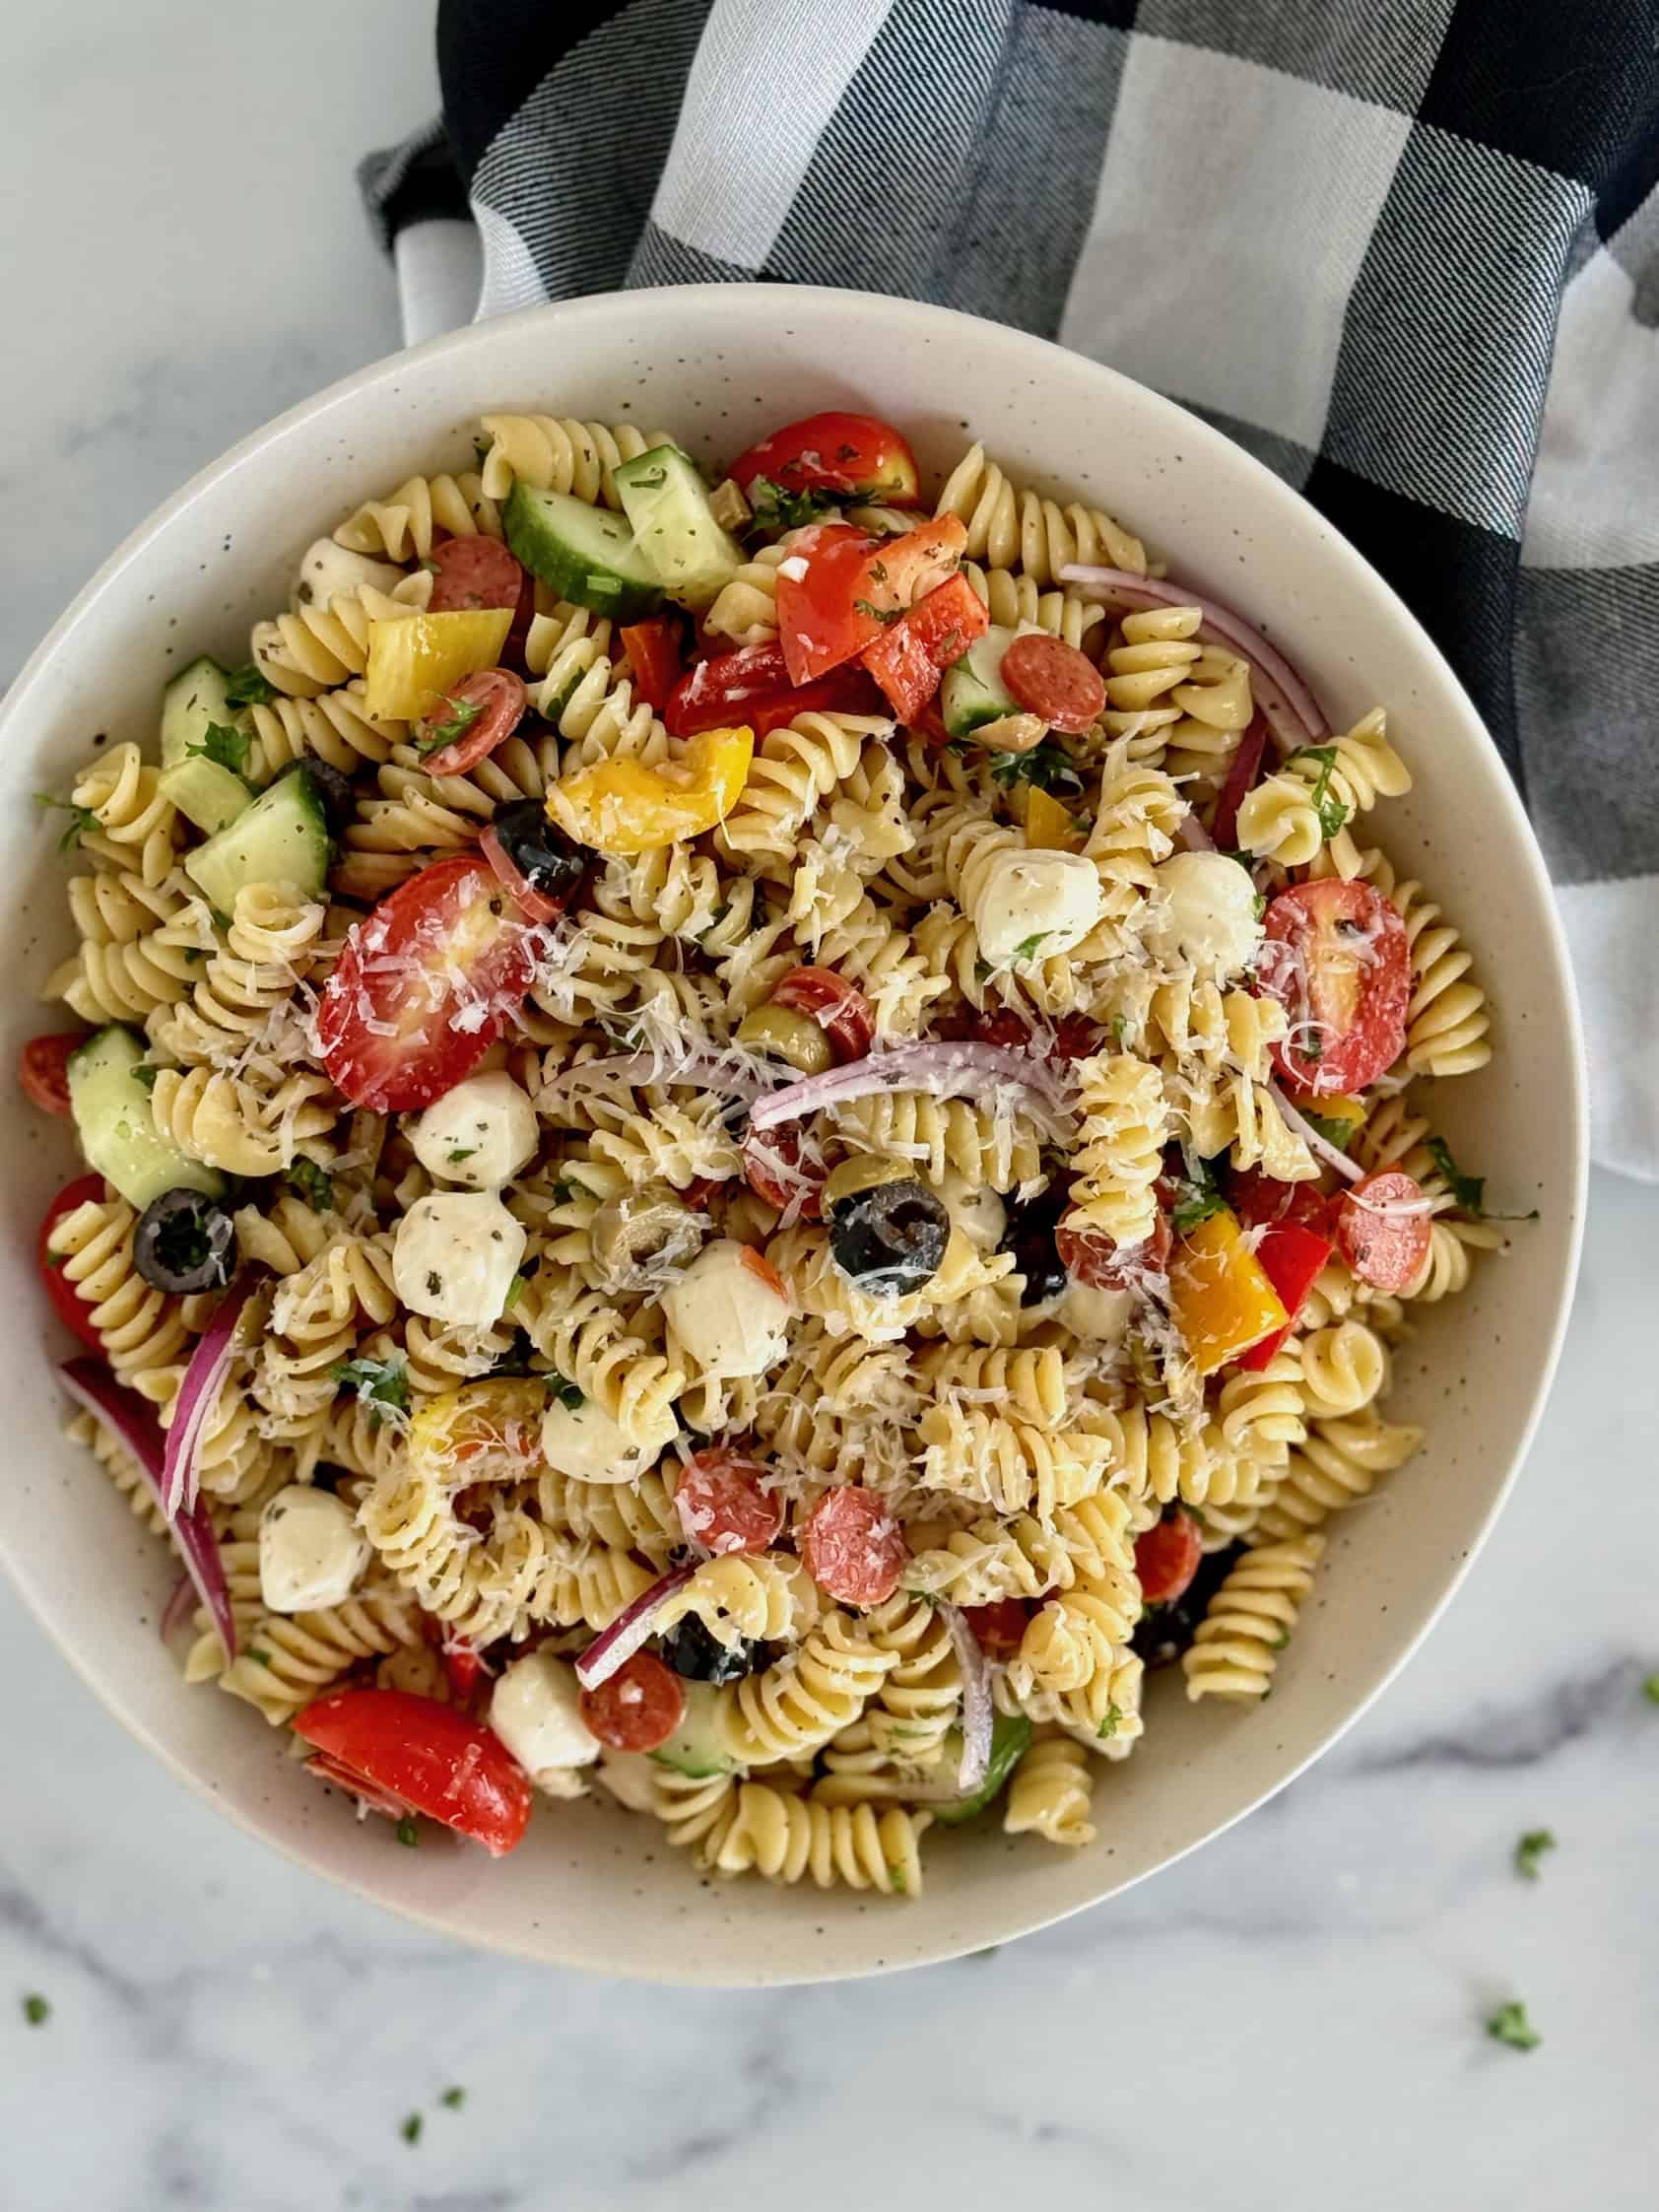 A large bowl of pasta mixed with colorful veggies, black olives, mozzarella cheese balls, and a zesty dressing, perfect for a summer picnic or bbq.